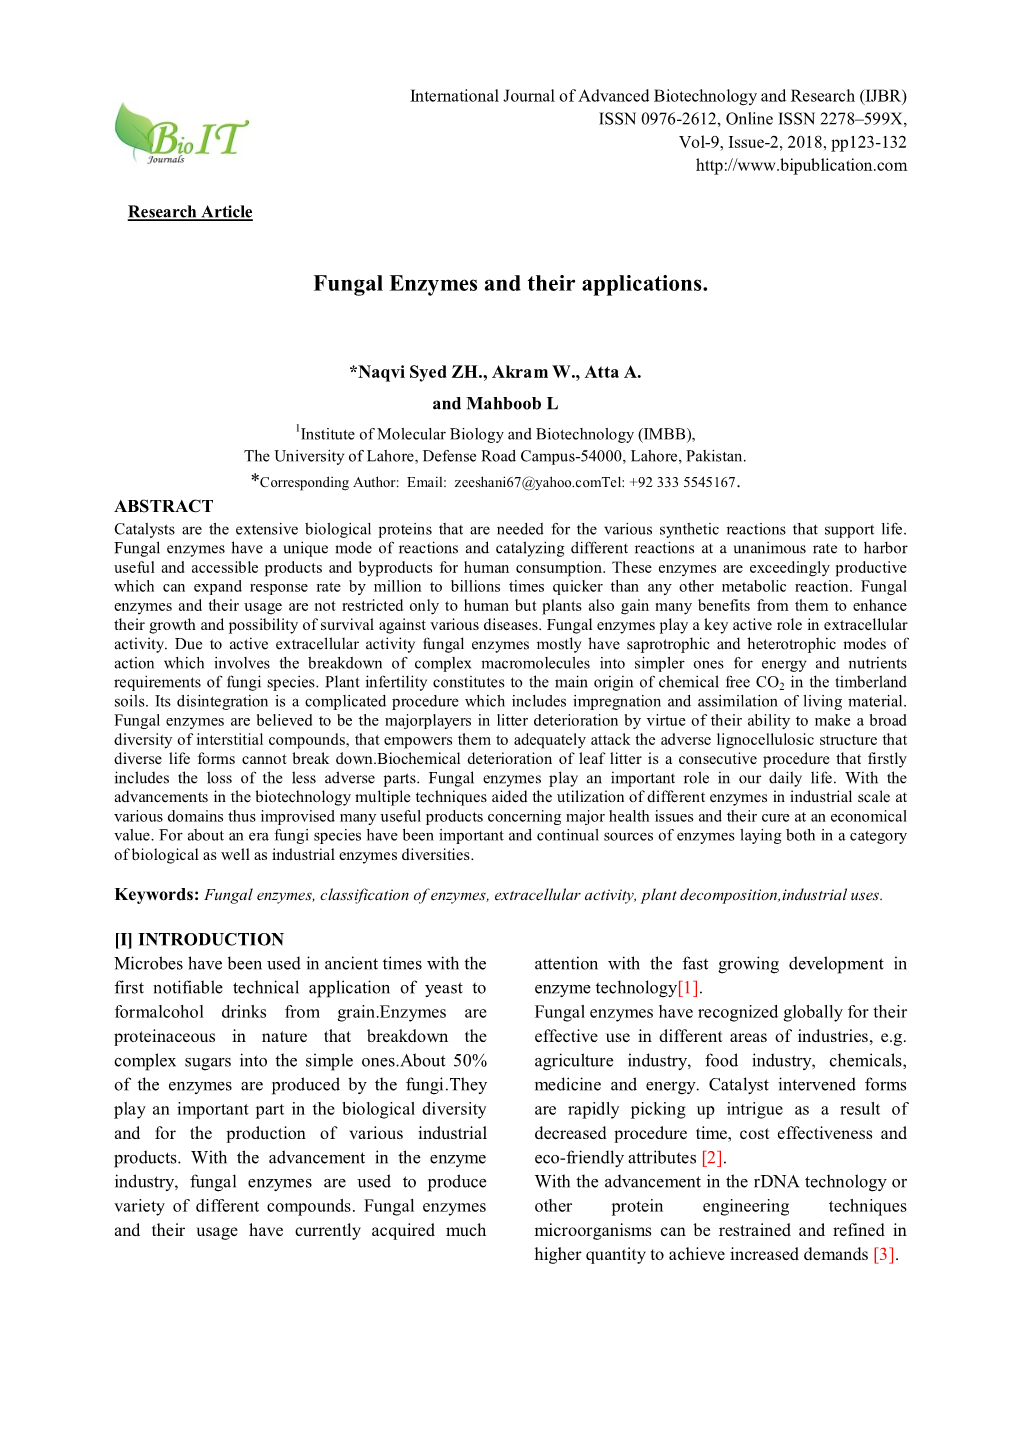 Fungal Enzymes and Their Applications